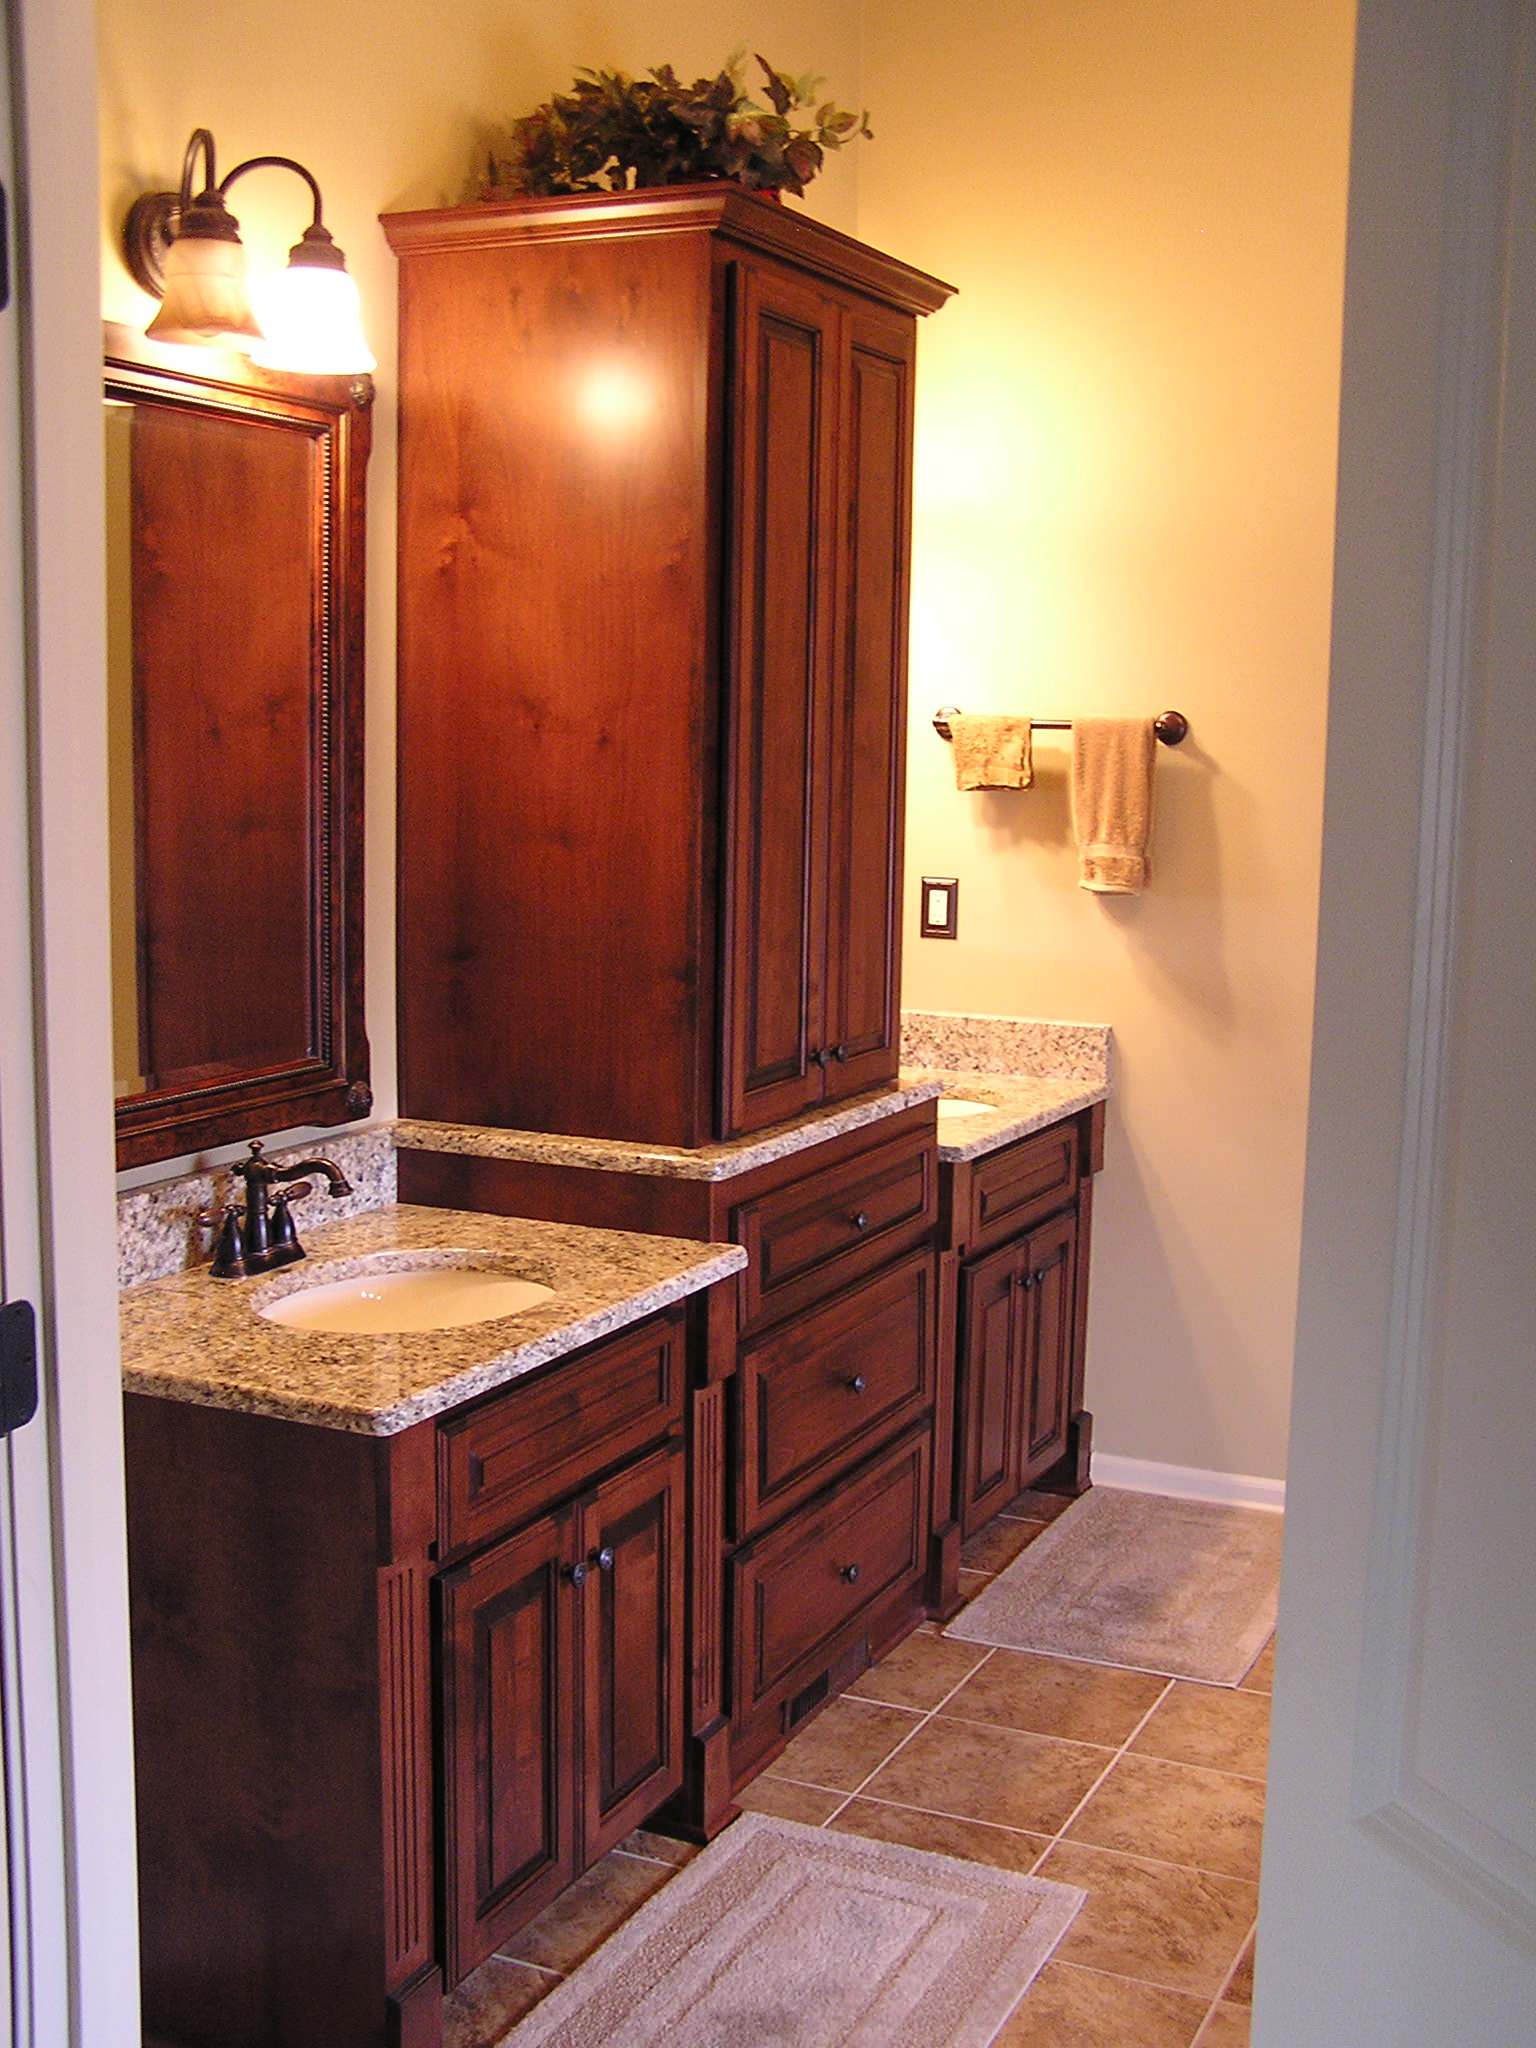 Bathroom Remodeling With Cabinet Refacing Kitchen Solvers Of Kansas City Img~c02131eb0138df99 14 4914 1 596ebdb 